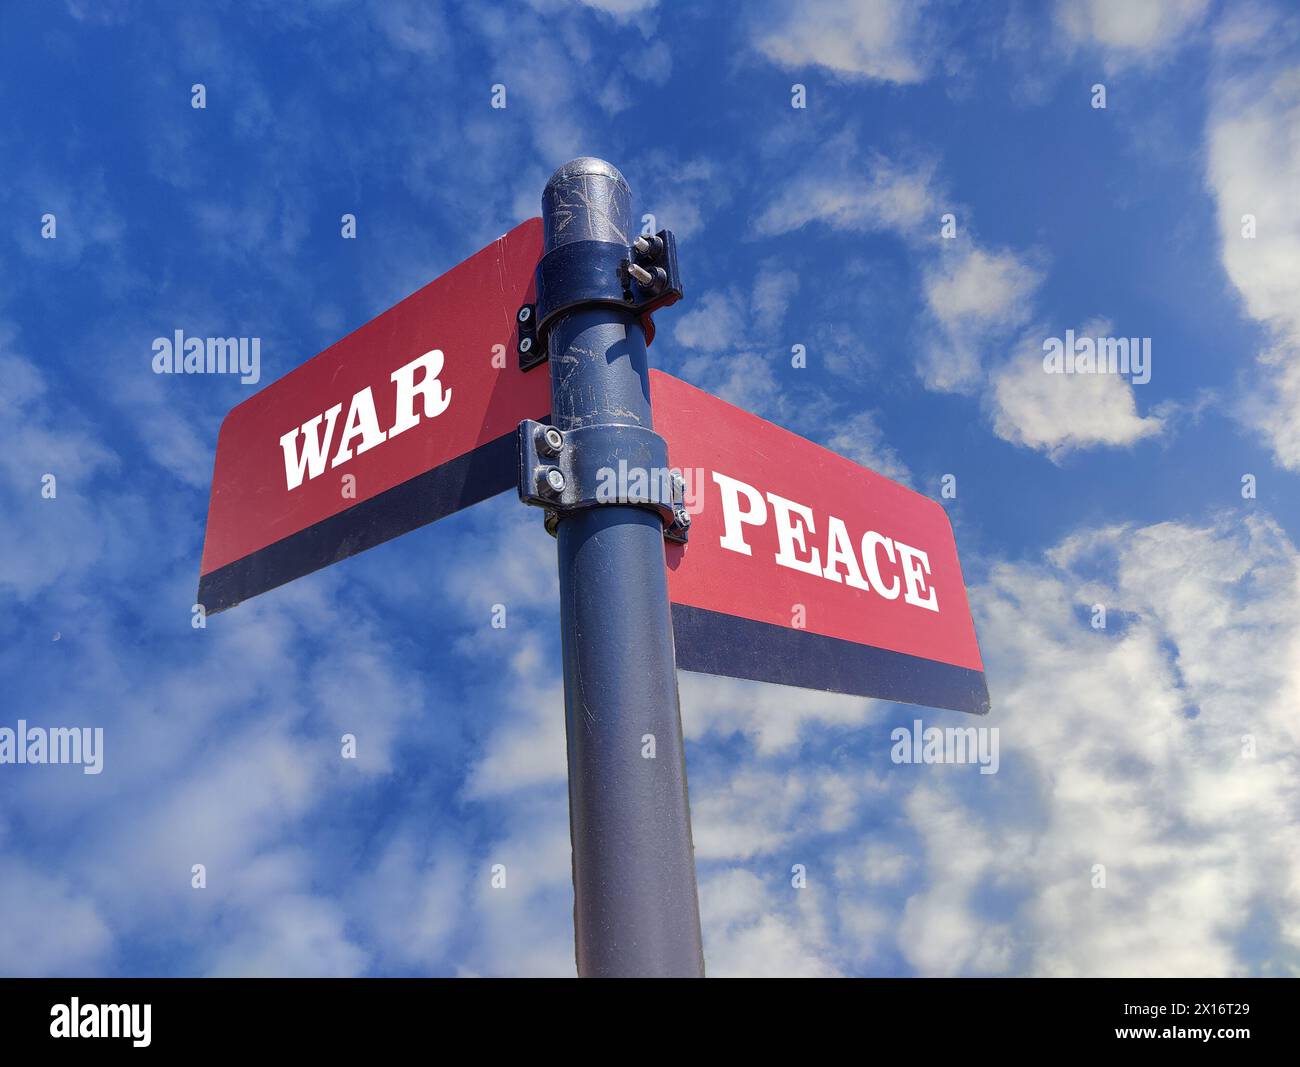 3d illustration, Red and black sign with the words peace and war written in white on the crossroads. Stock Photo